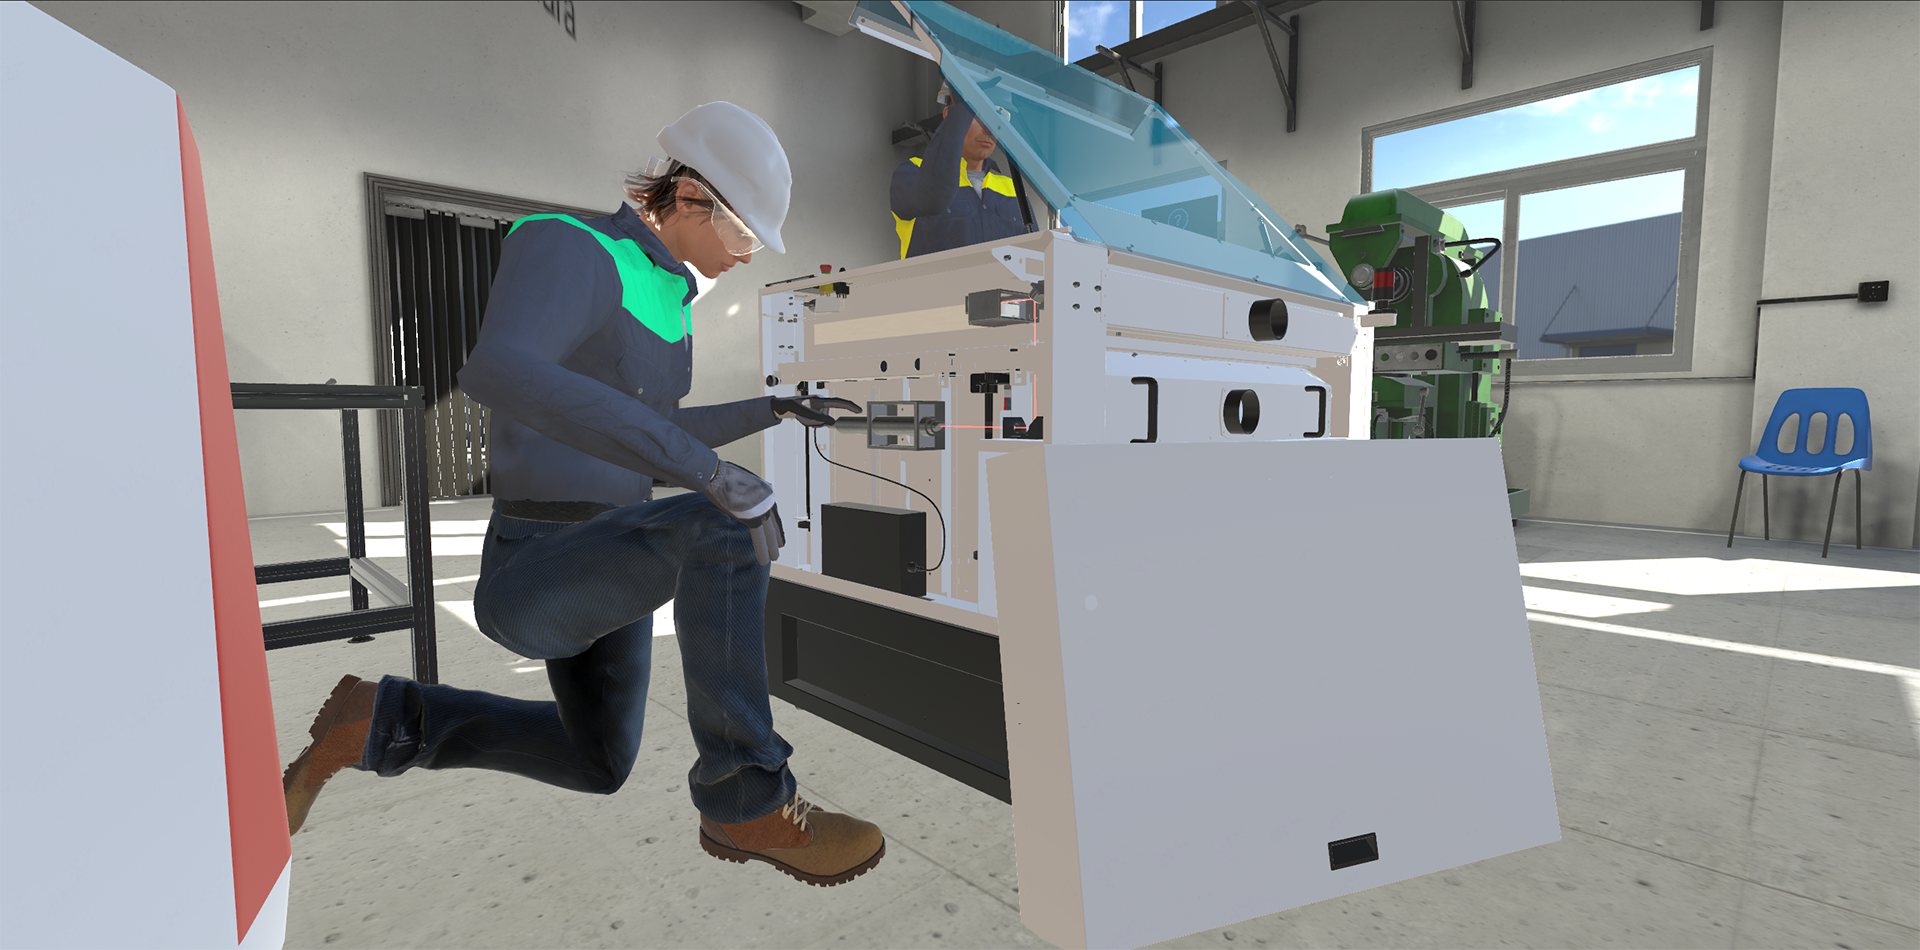 The VMachina 2 project has resulted in the development of a multi-user virtual reality platform for training industrial operators on machines and other job tasks.